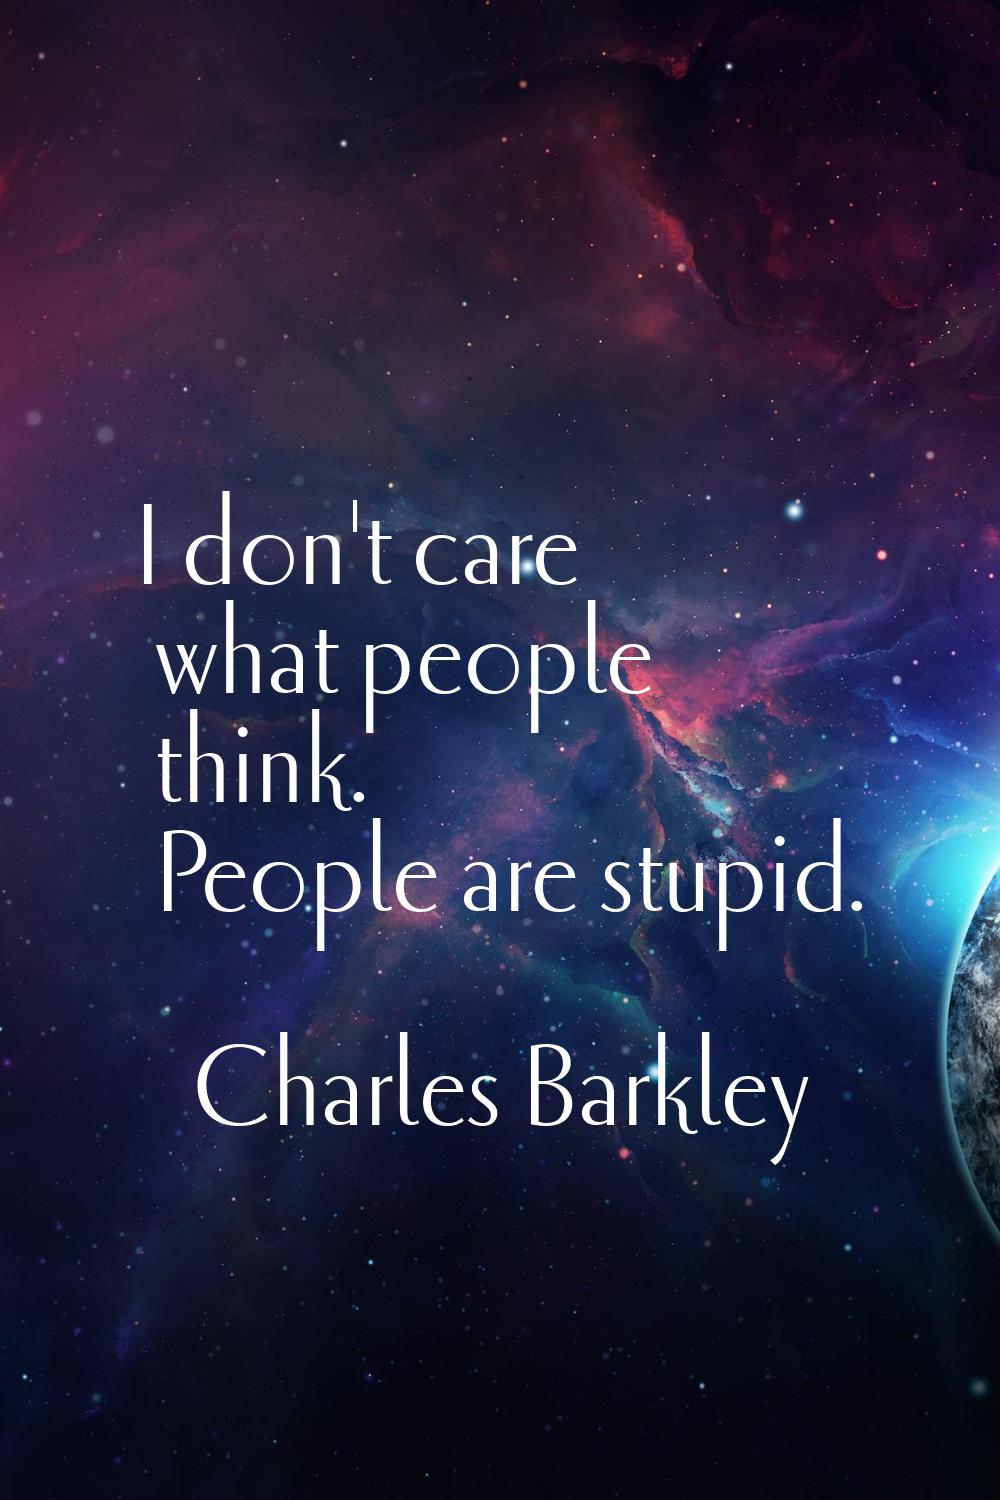 I don't care what people think. People are stupid.